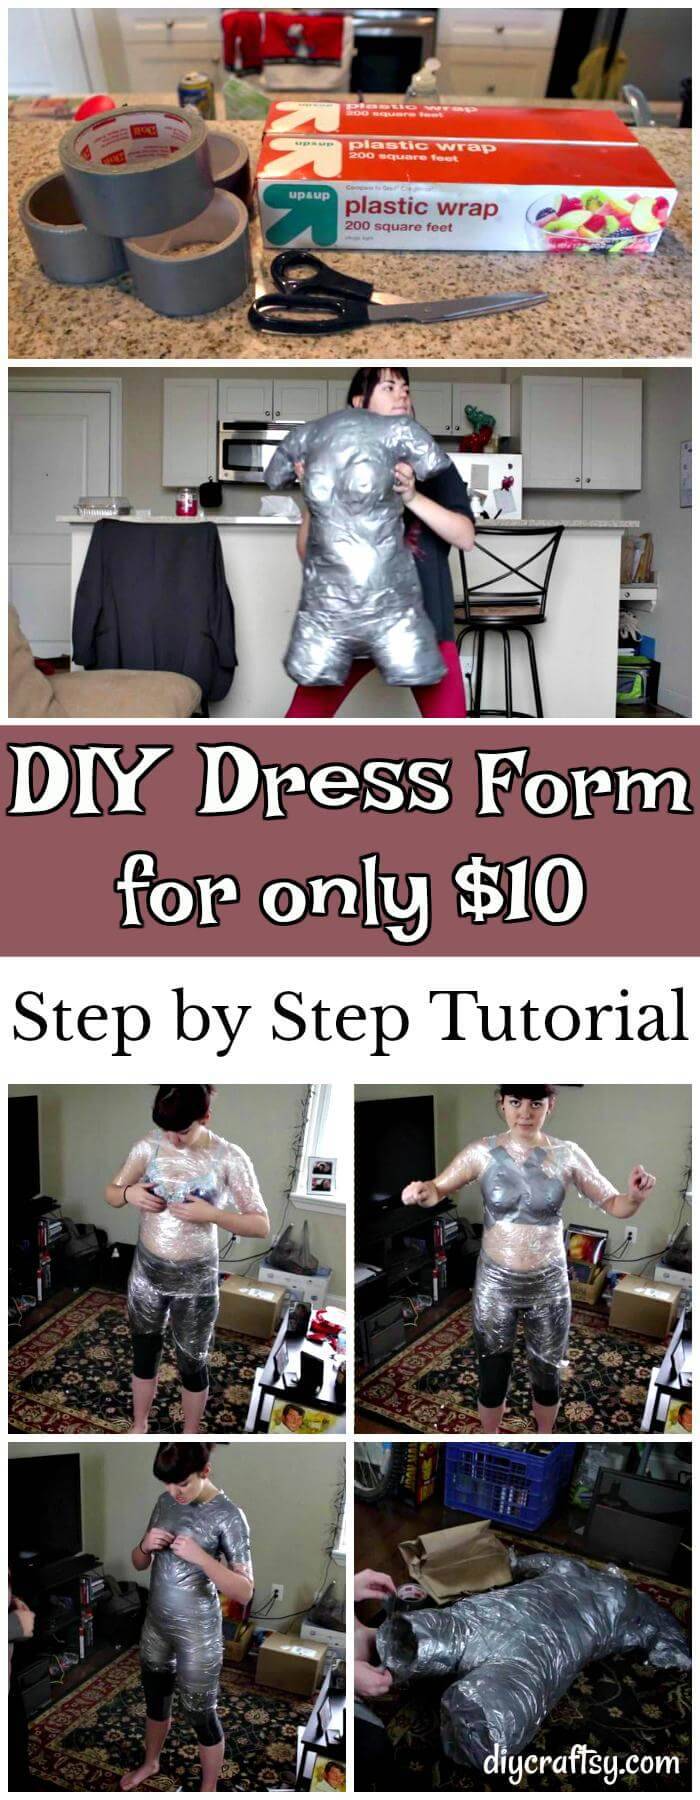 DIY Dress Form for only $10 - Step by Step Tutorial